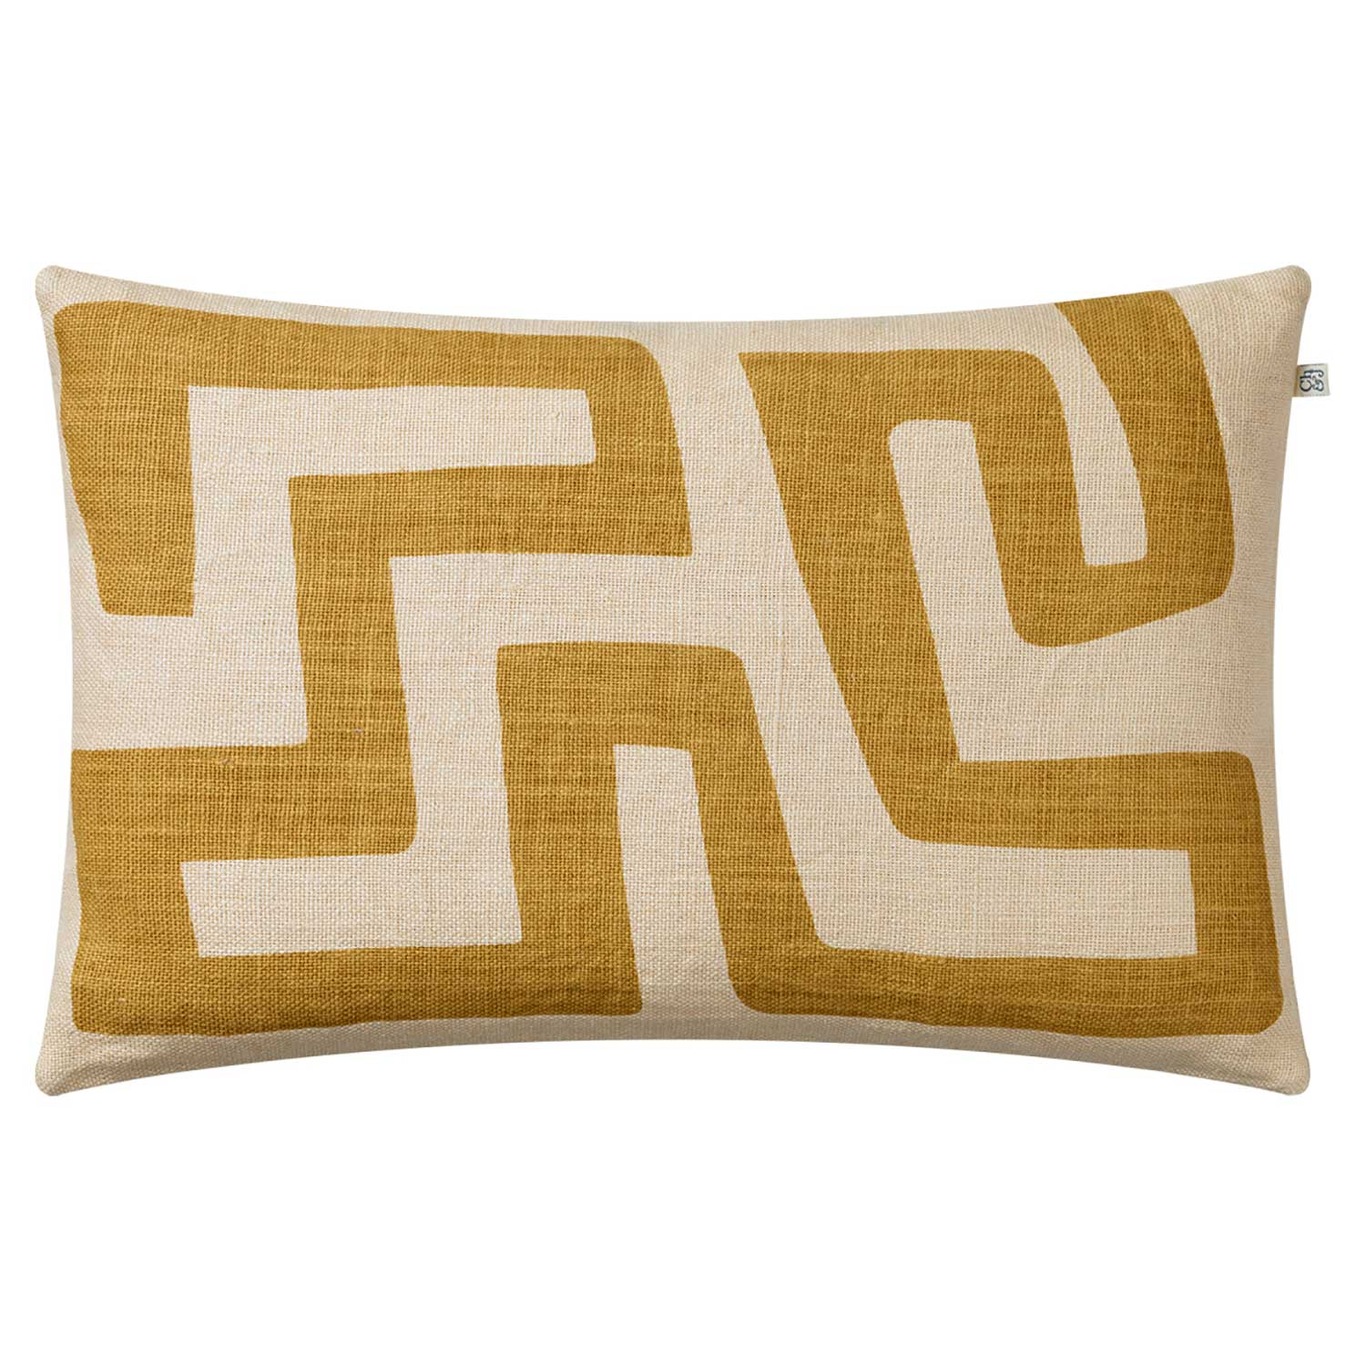 Nagra Cushion Cover 40x60 cm, Spicy Yellow